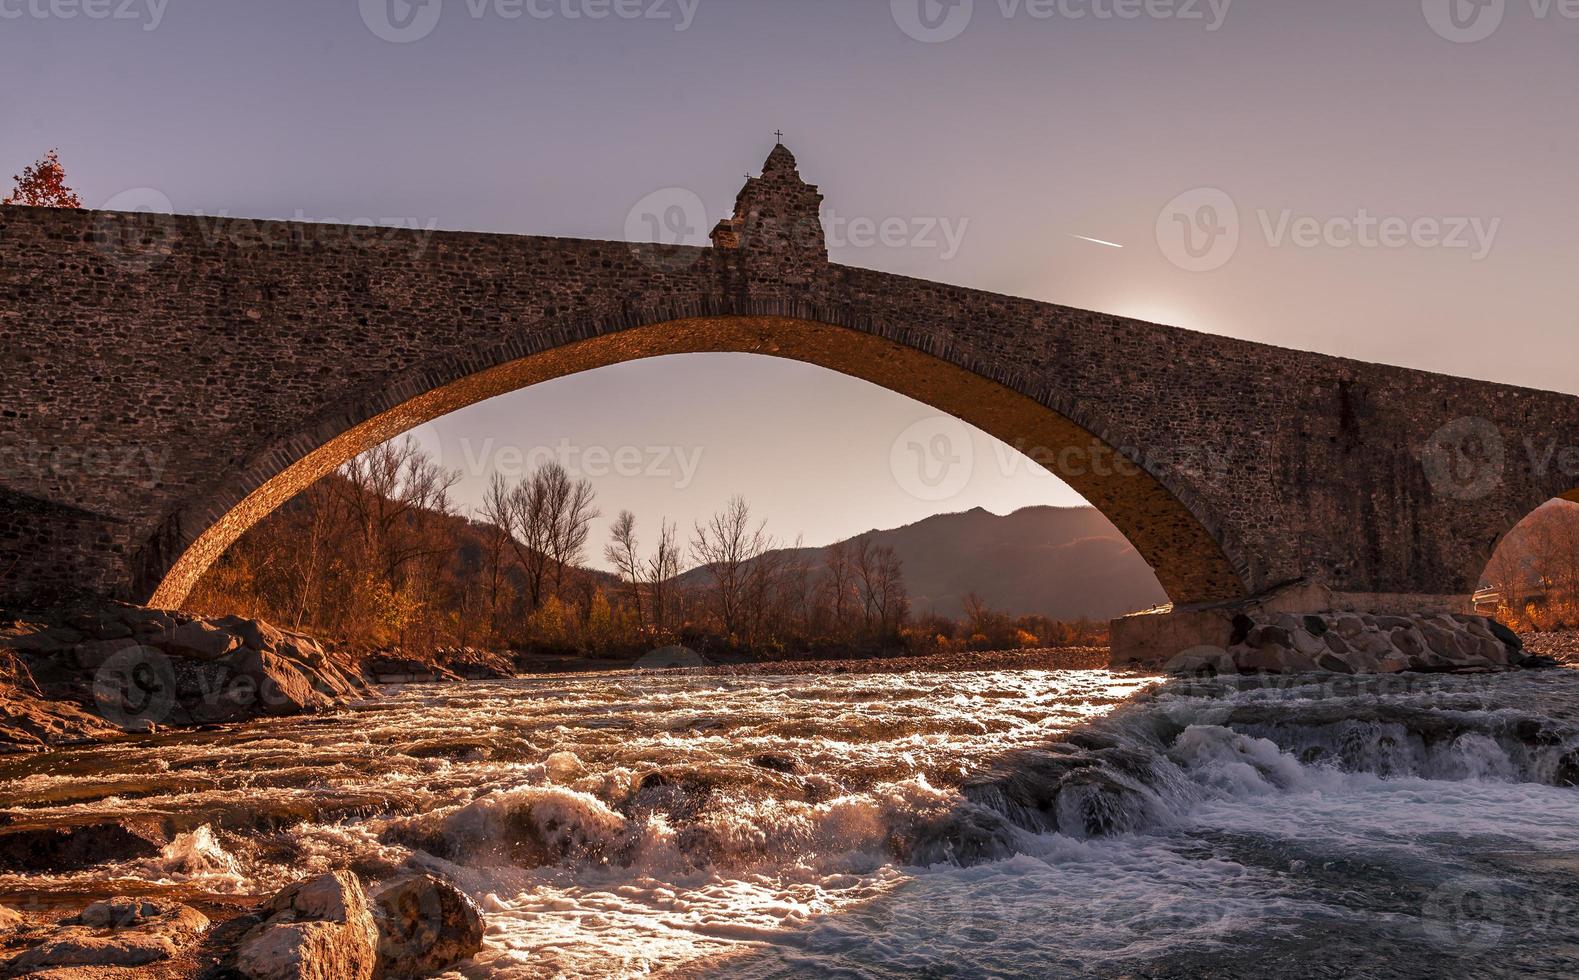 landscape of a medieval bridge over a turbulent river at sunset photo